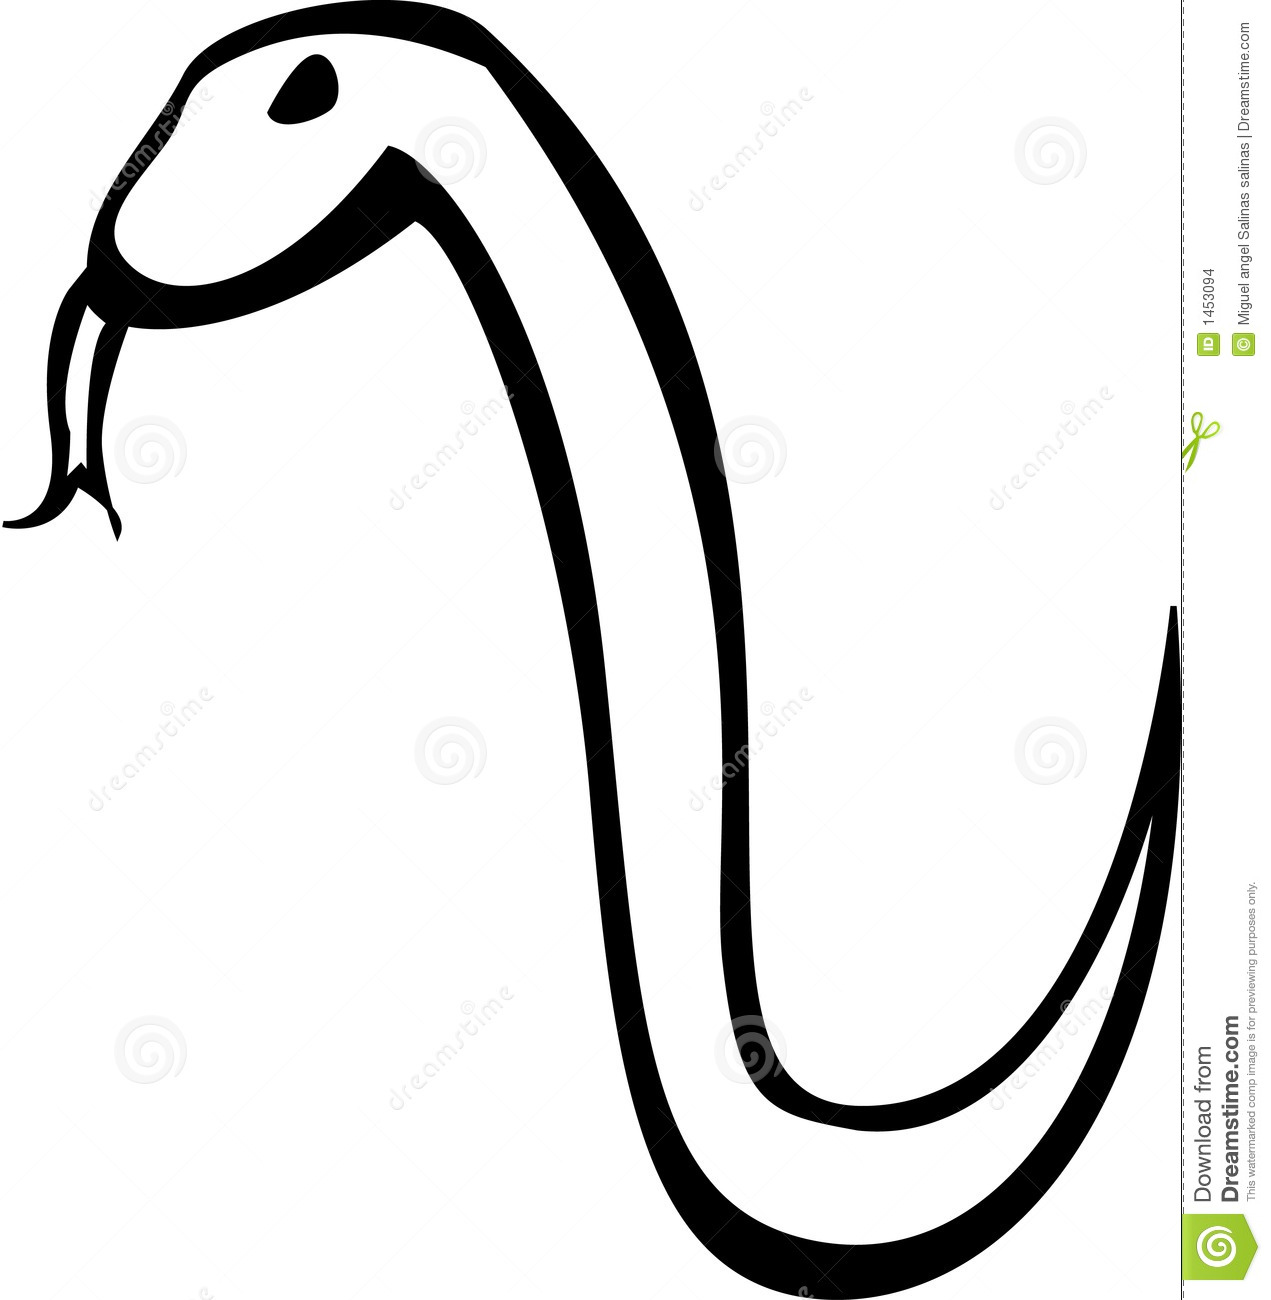 Angry Snake Vector Illustration Stock Images   Image  1453094